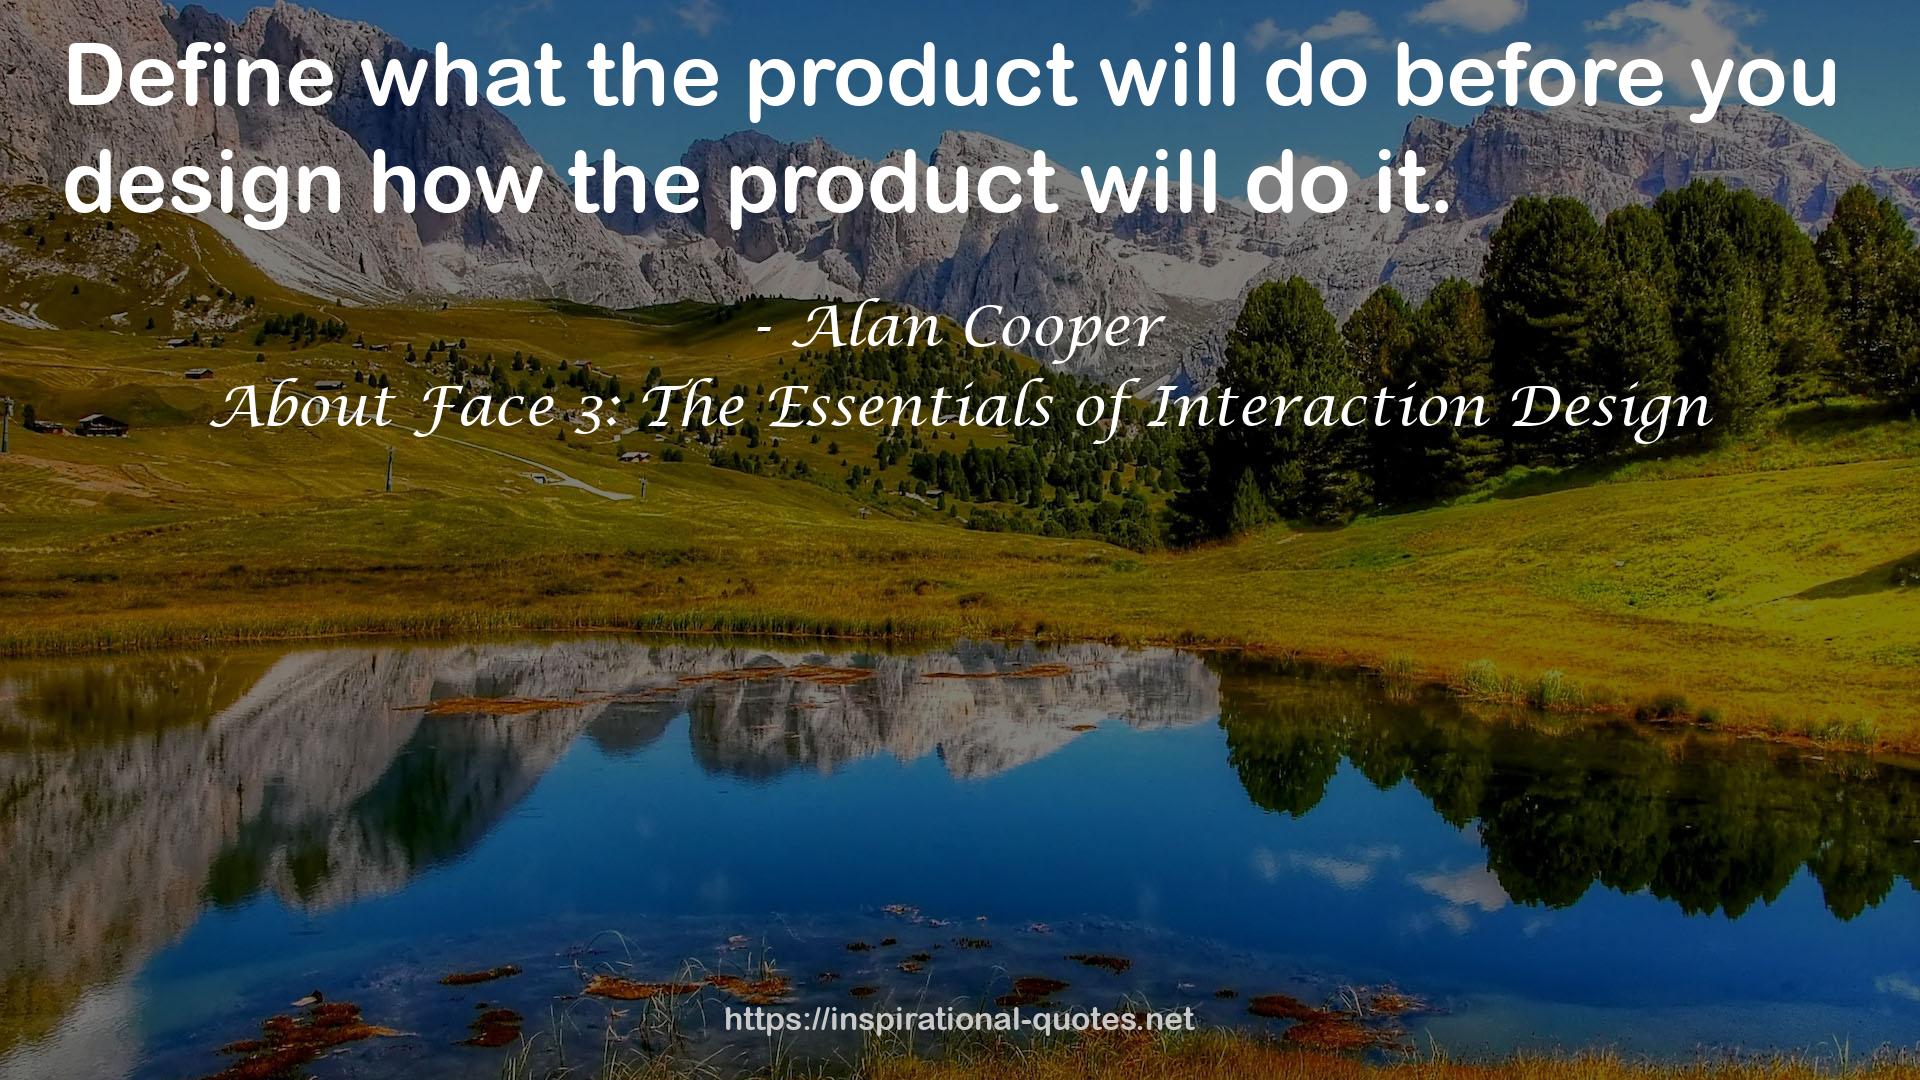 About Face 3: The Essentials of Interaction Design QUOTES